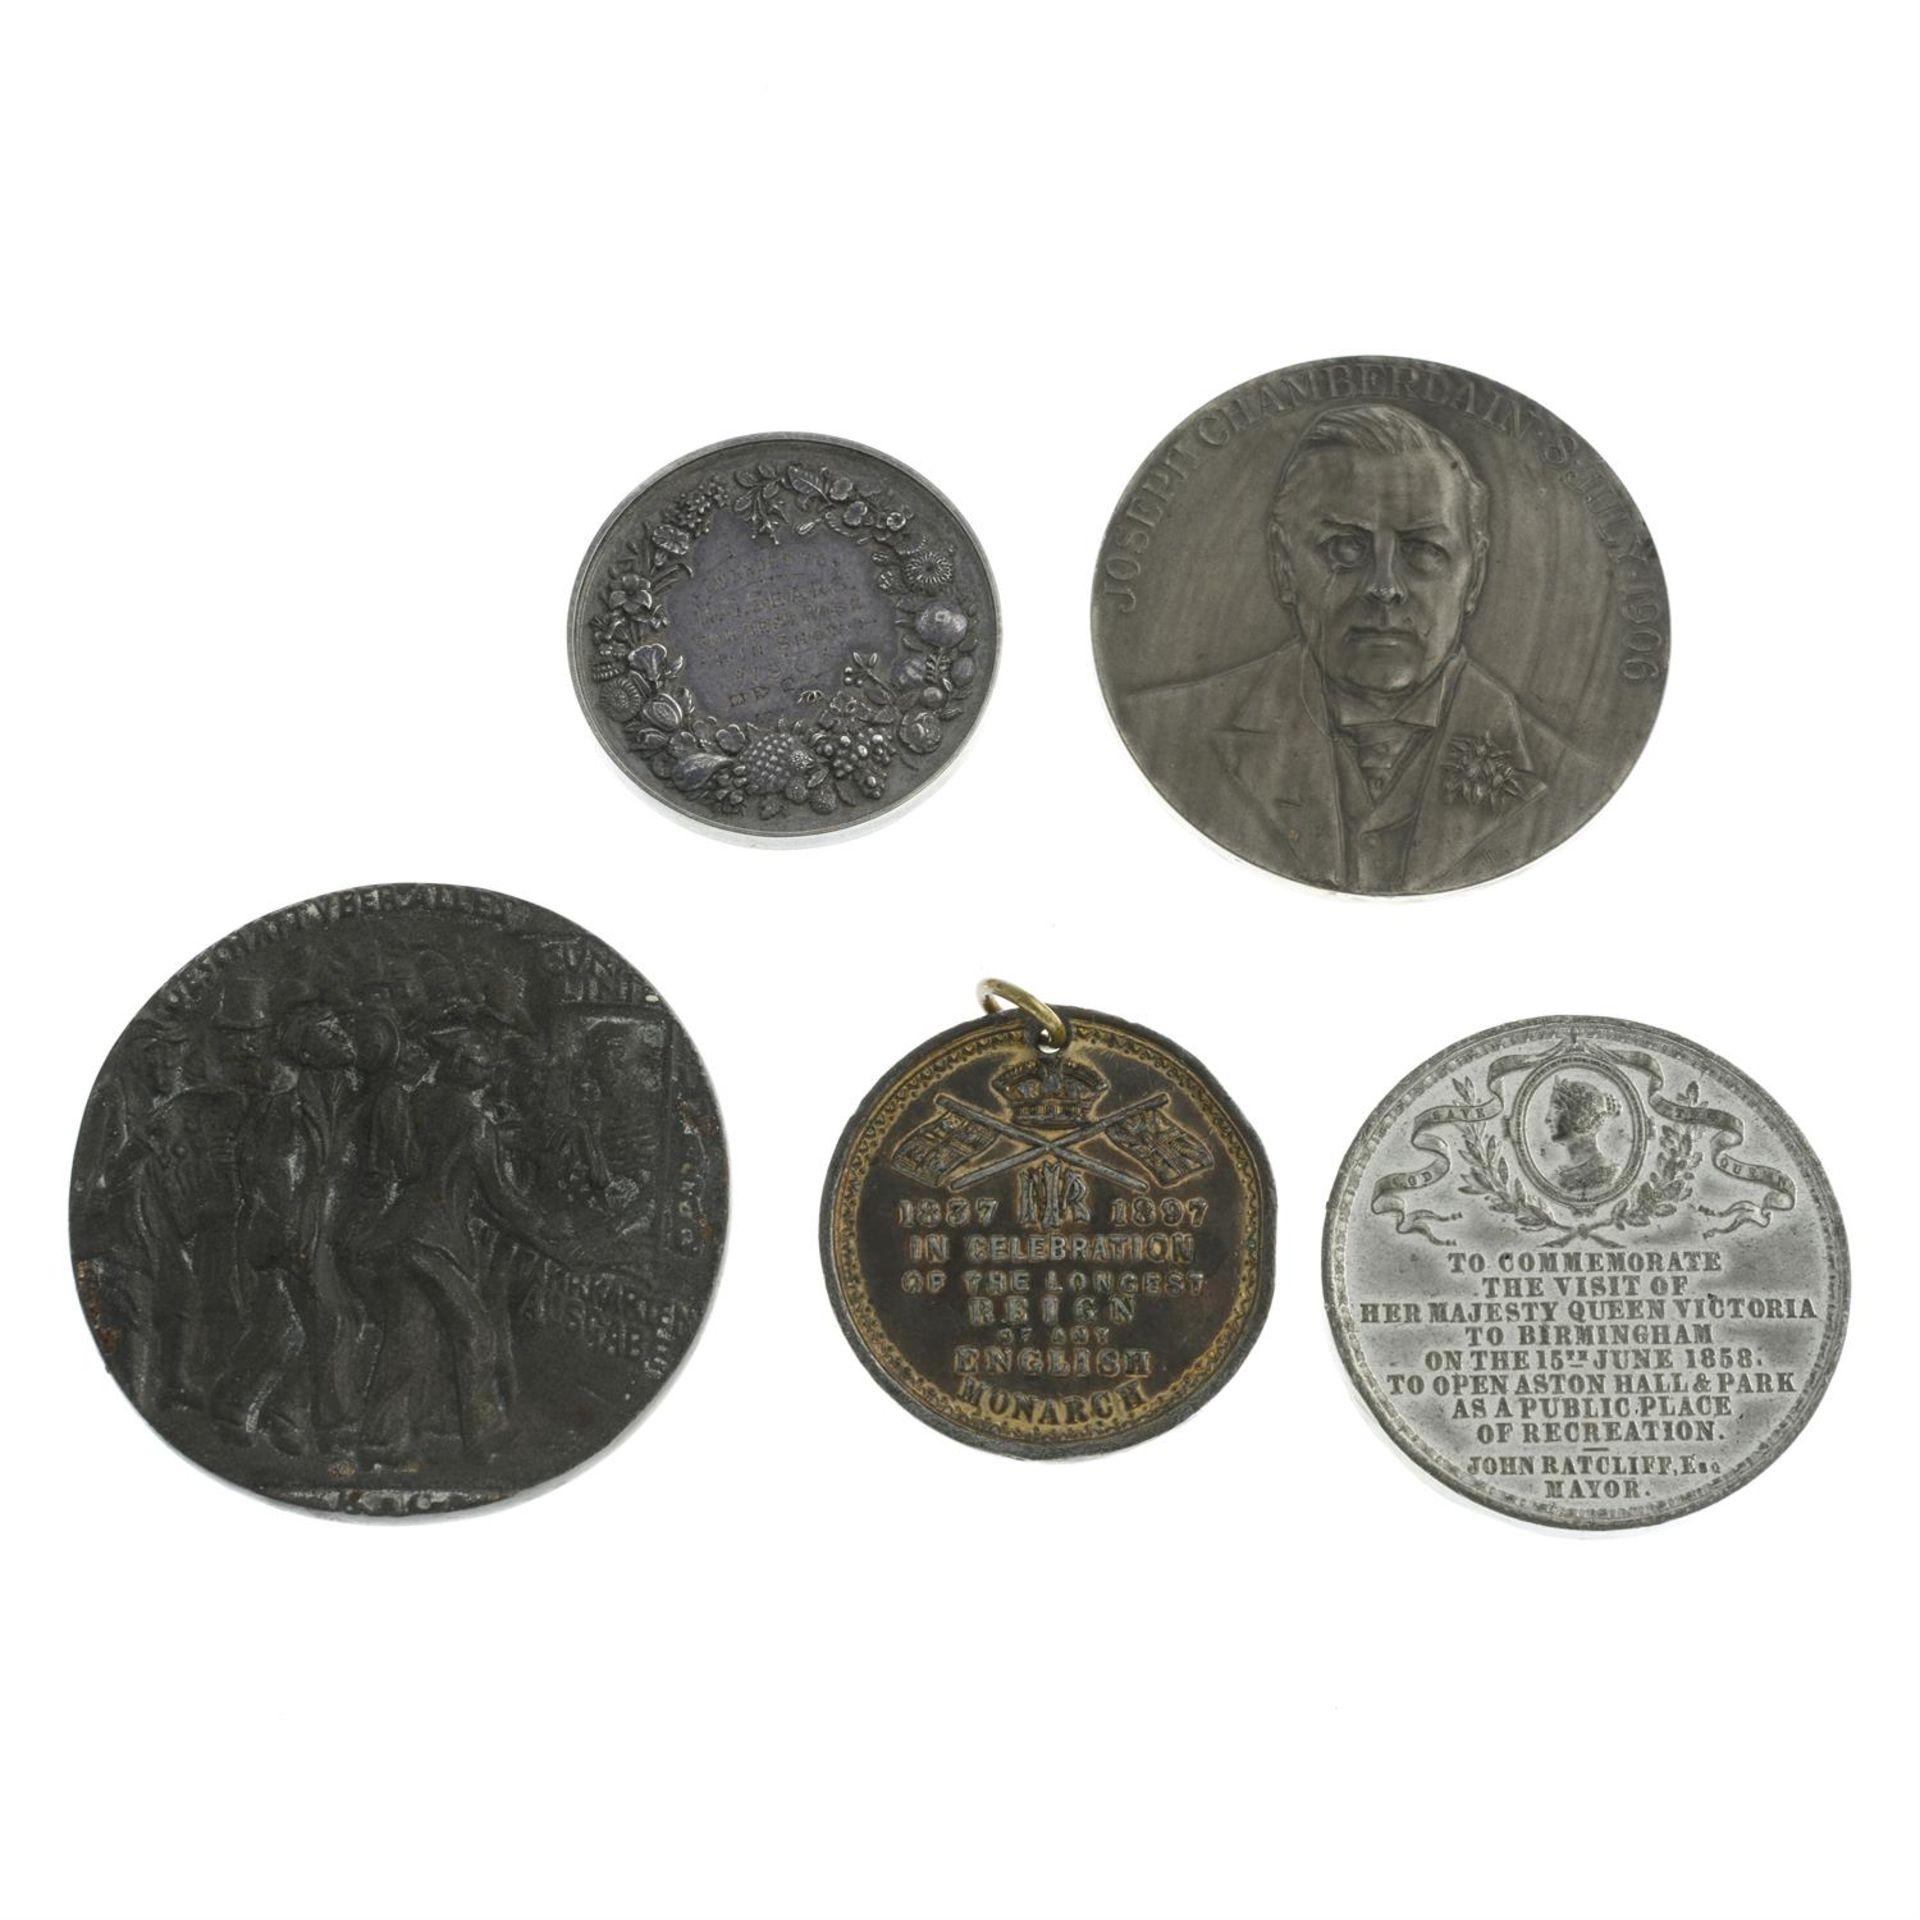 Aston Hall & Park Medal, along with 4 others. - Image 2 of 2